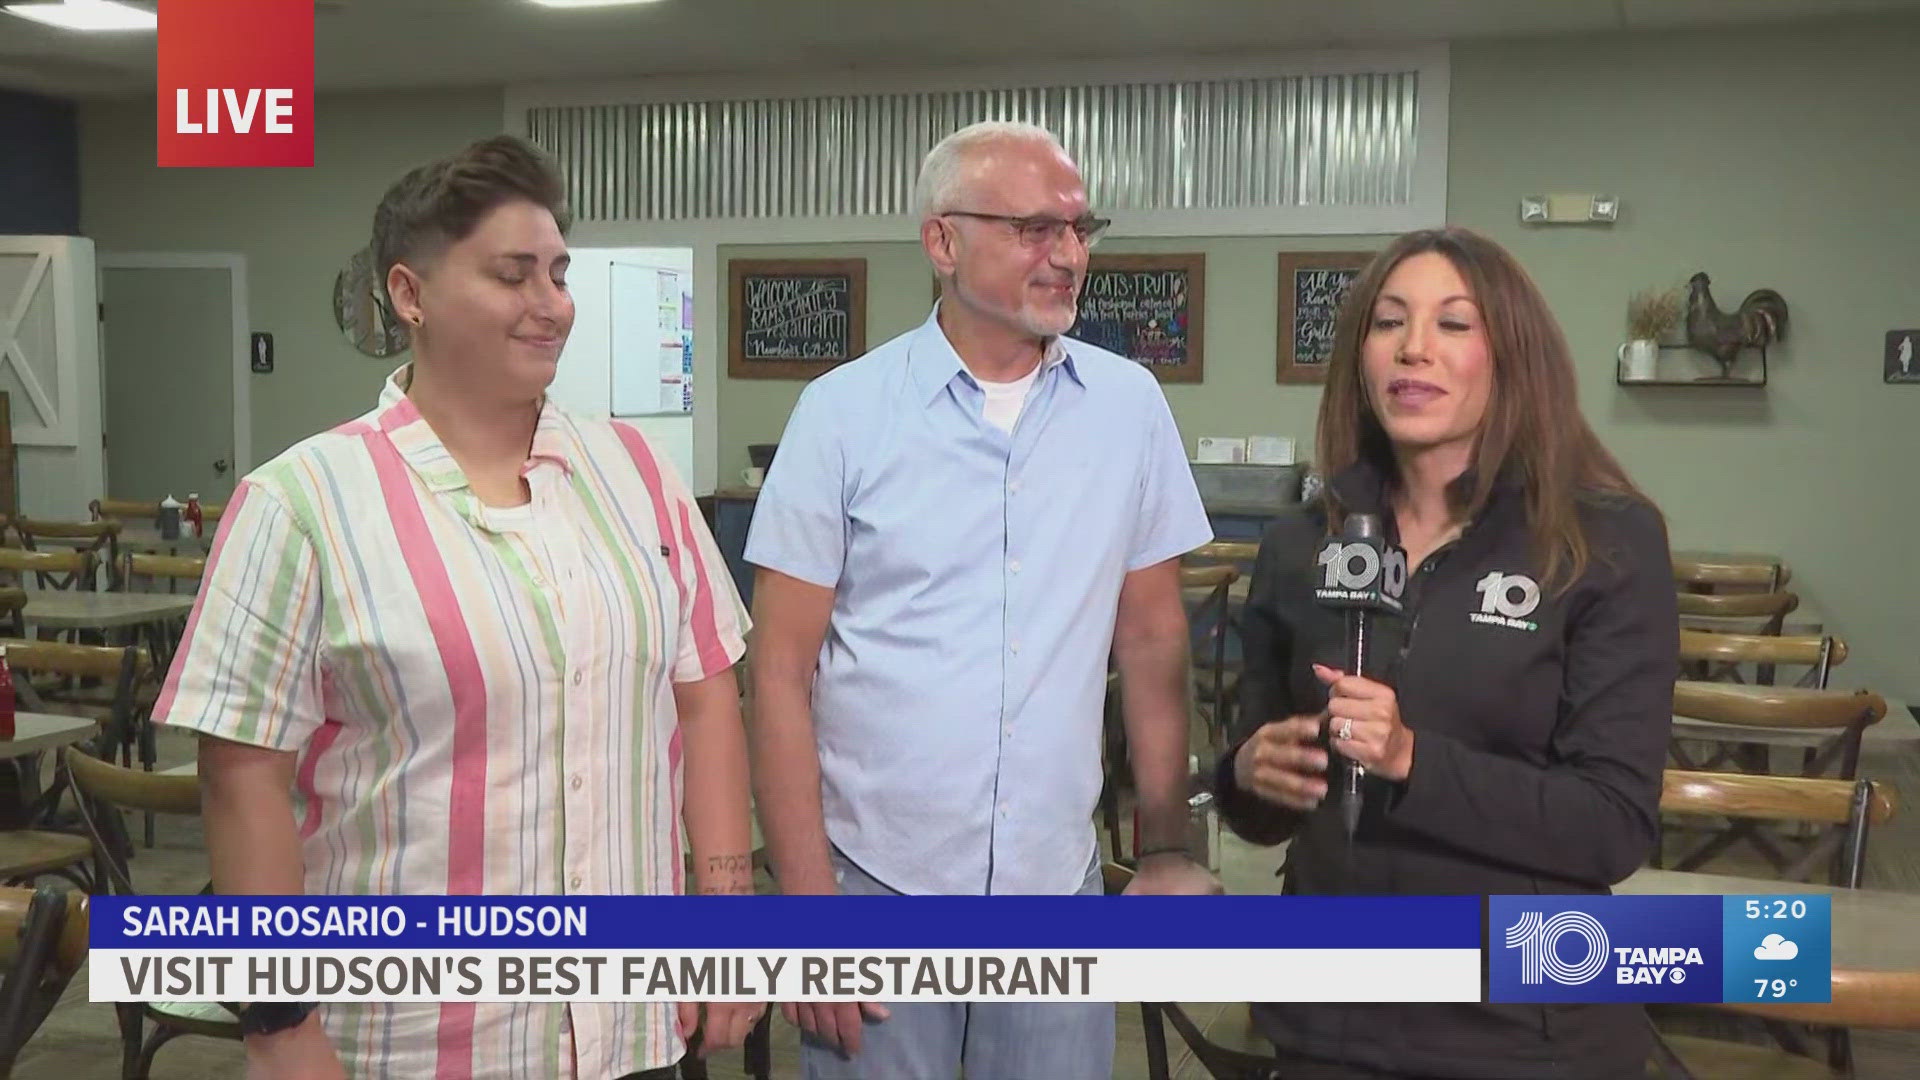 Ram's Family Restaurant has been open for more than two decades and the owner says customers feel like family.